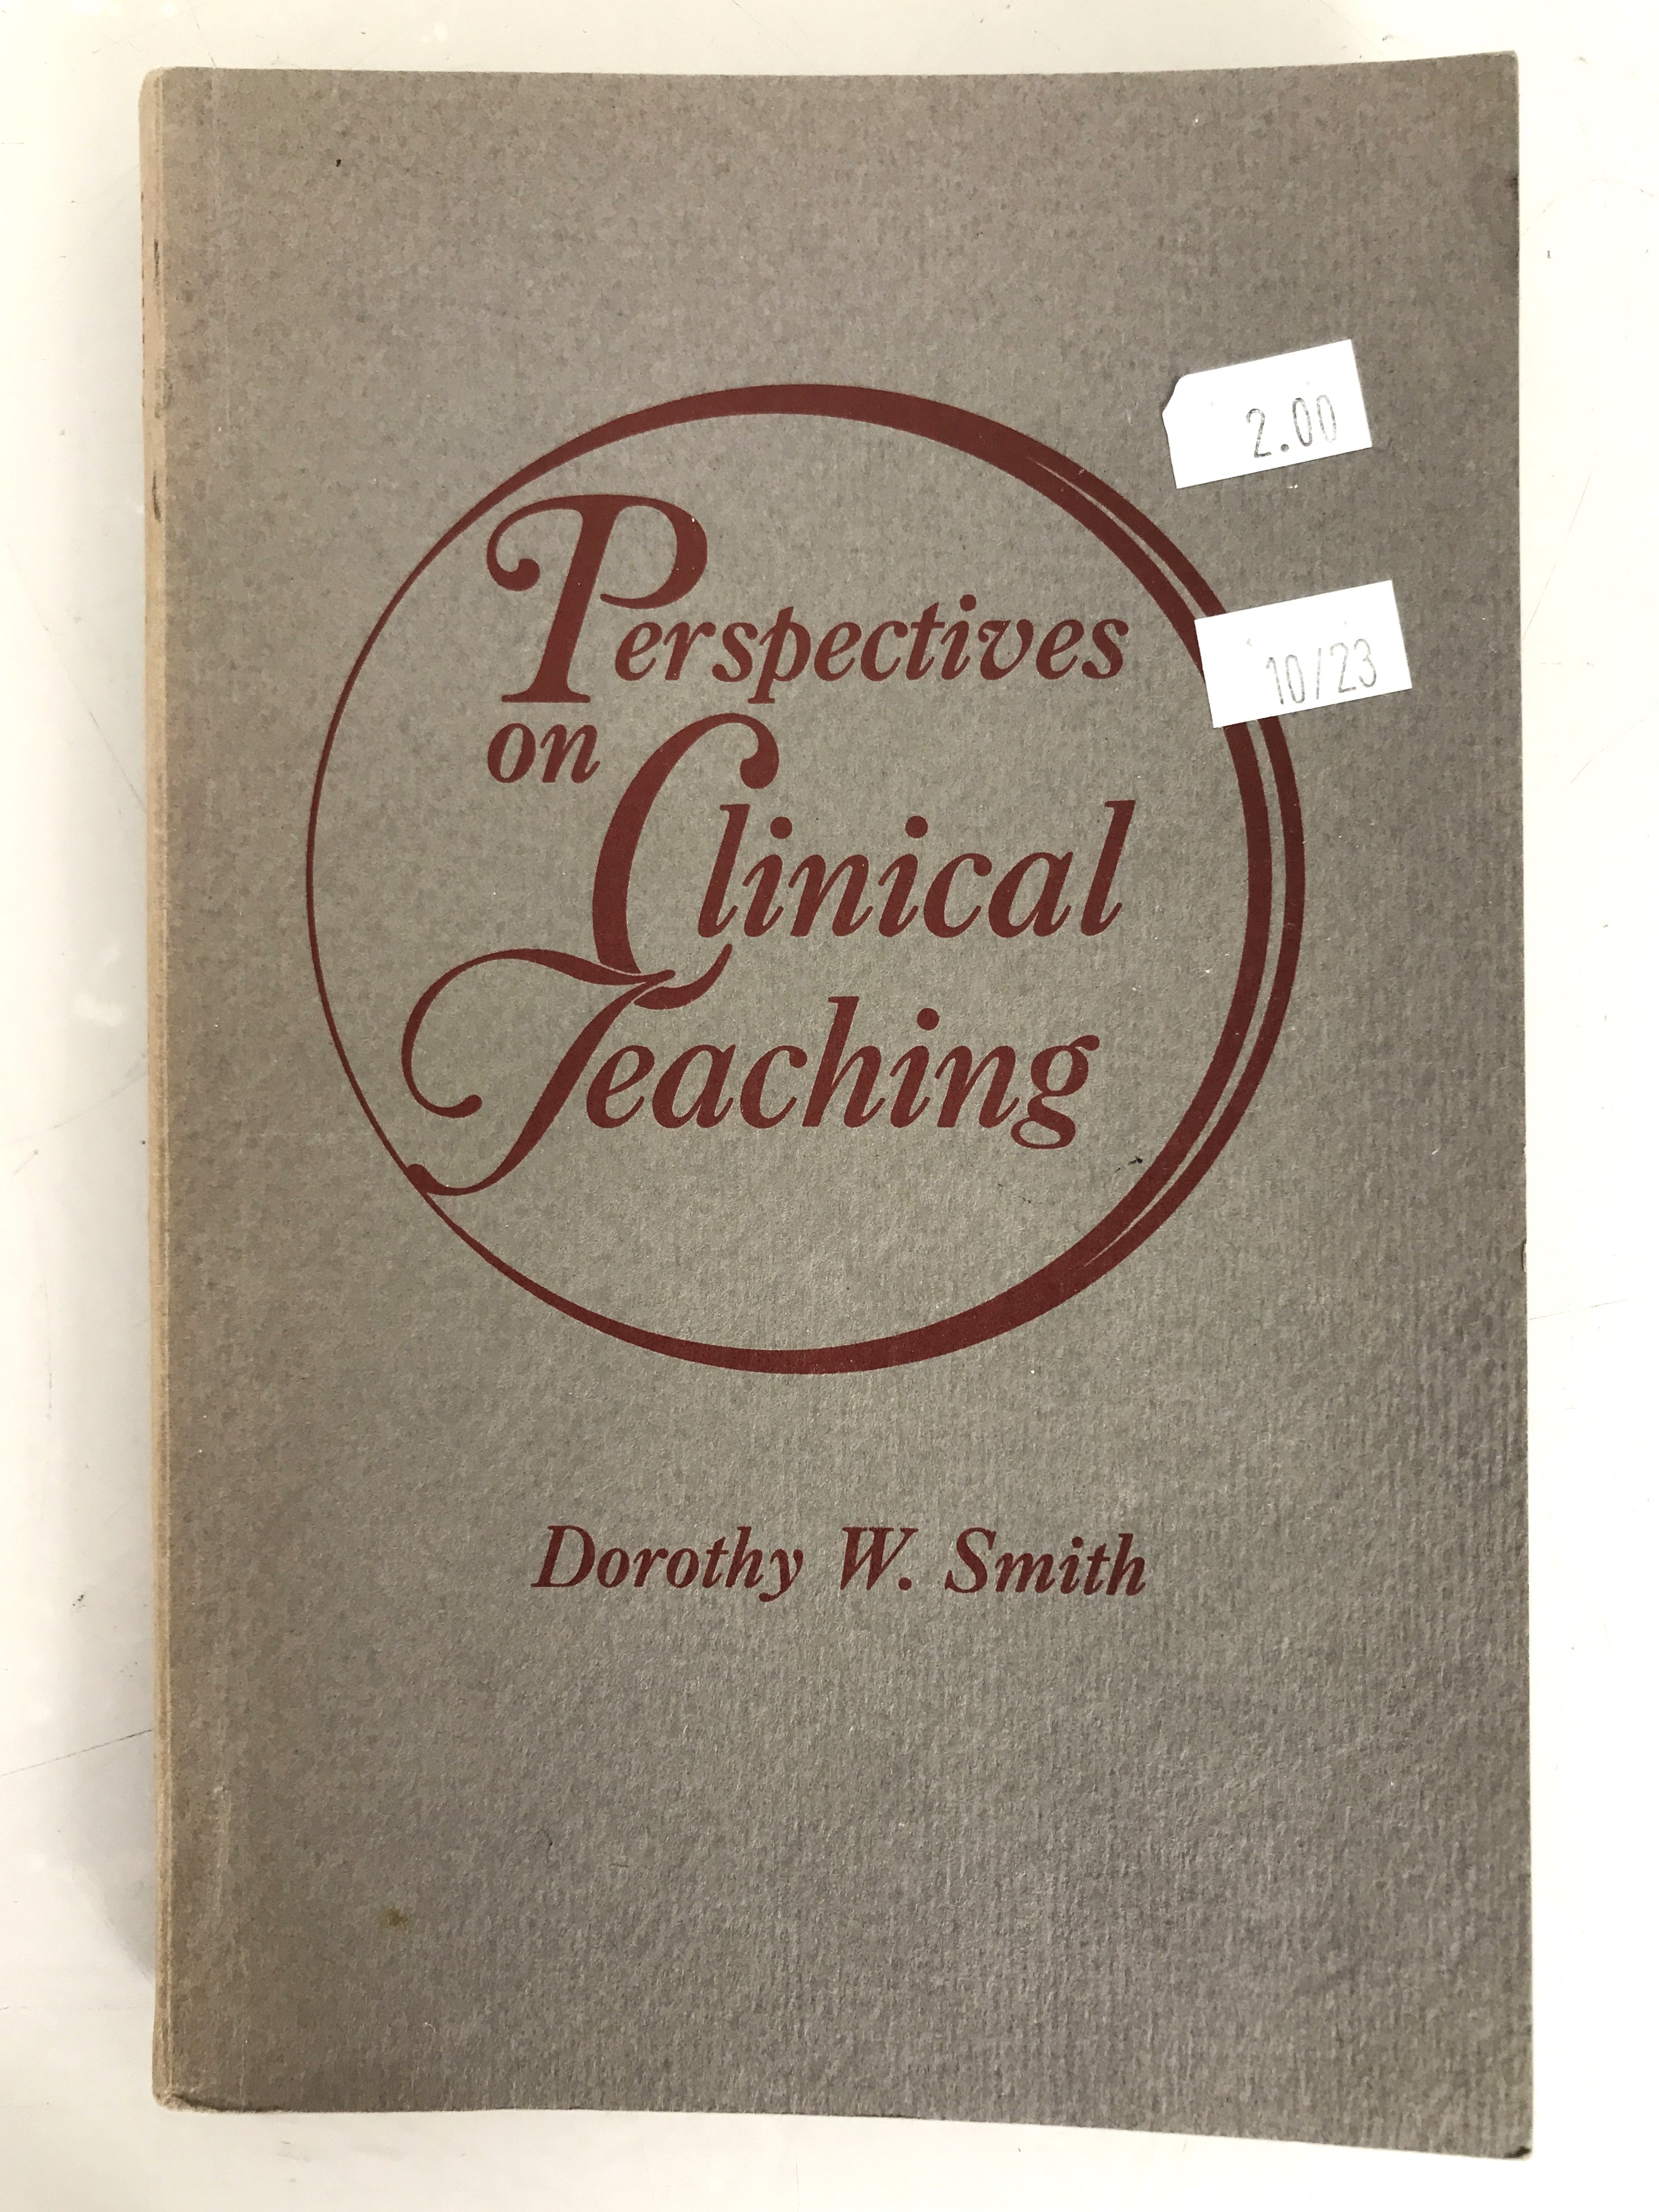 Perspectives on Clinical Teaching by Dorothy Smith 1968 SC